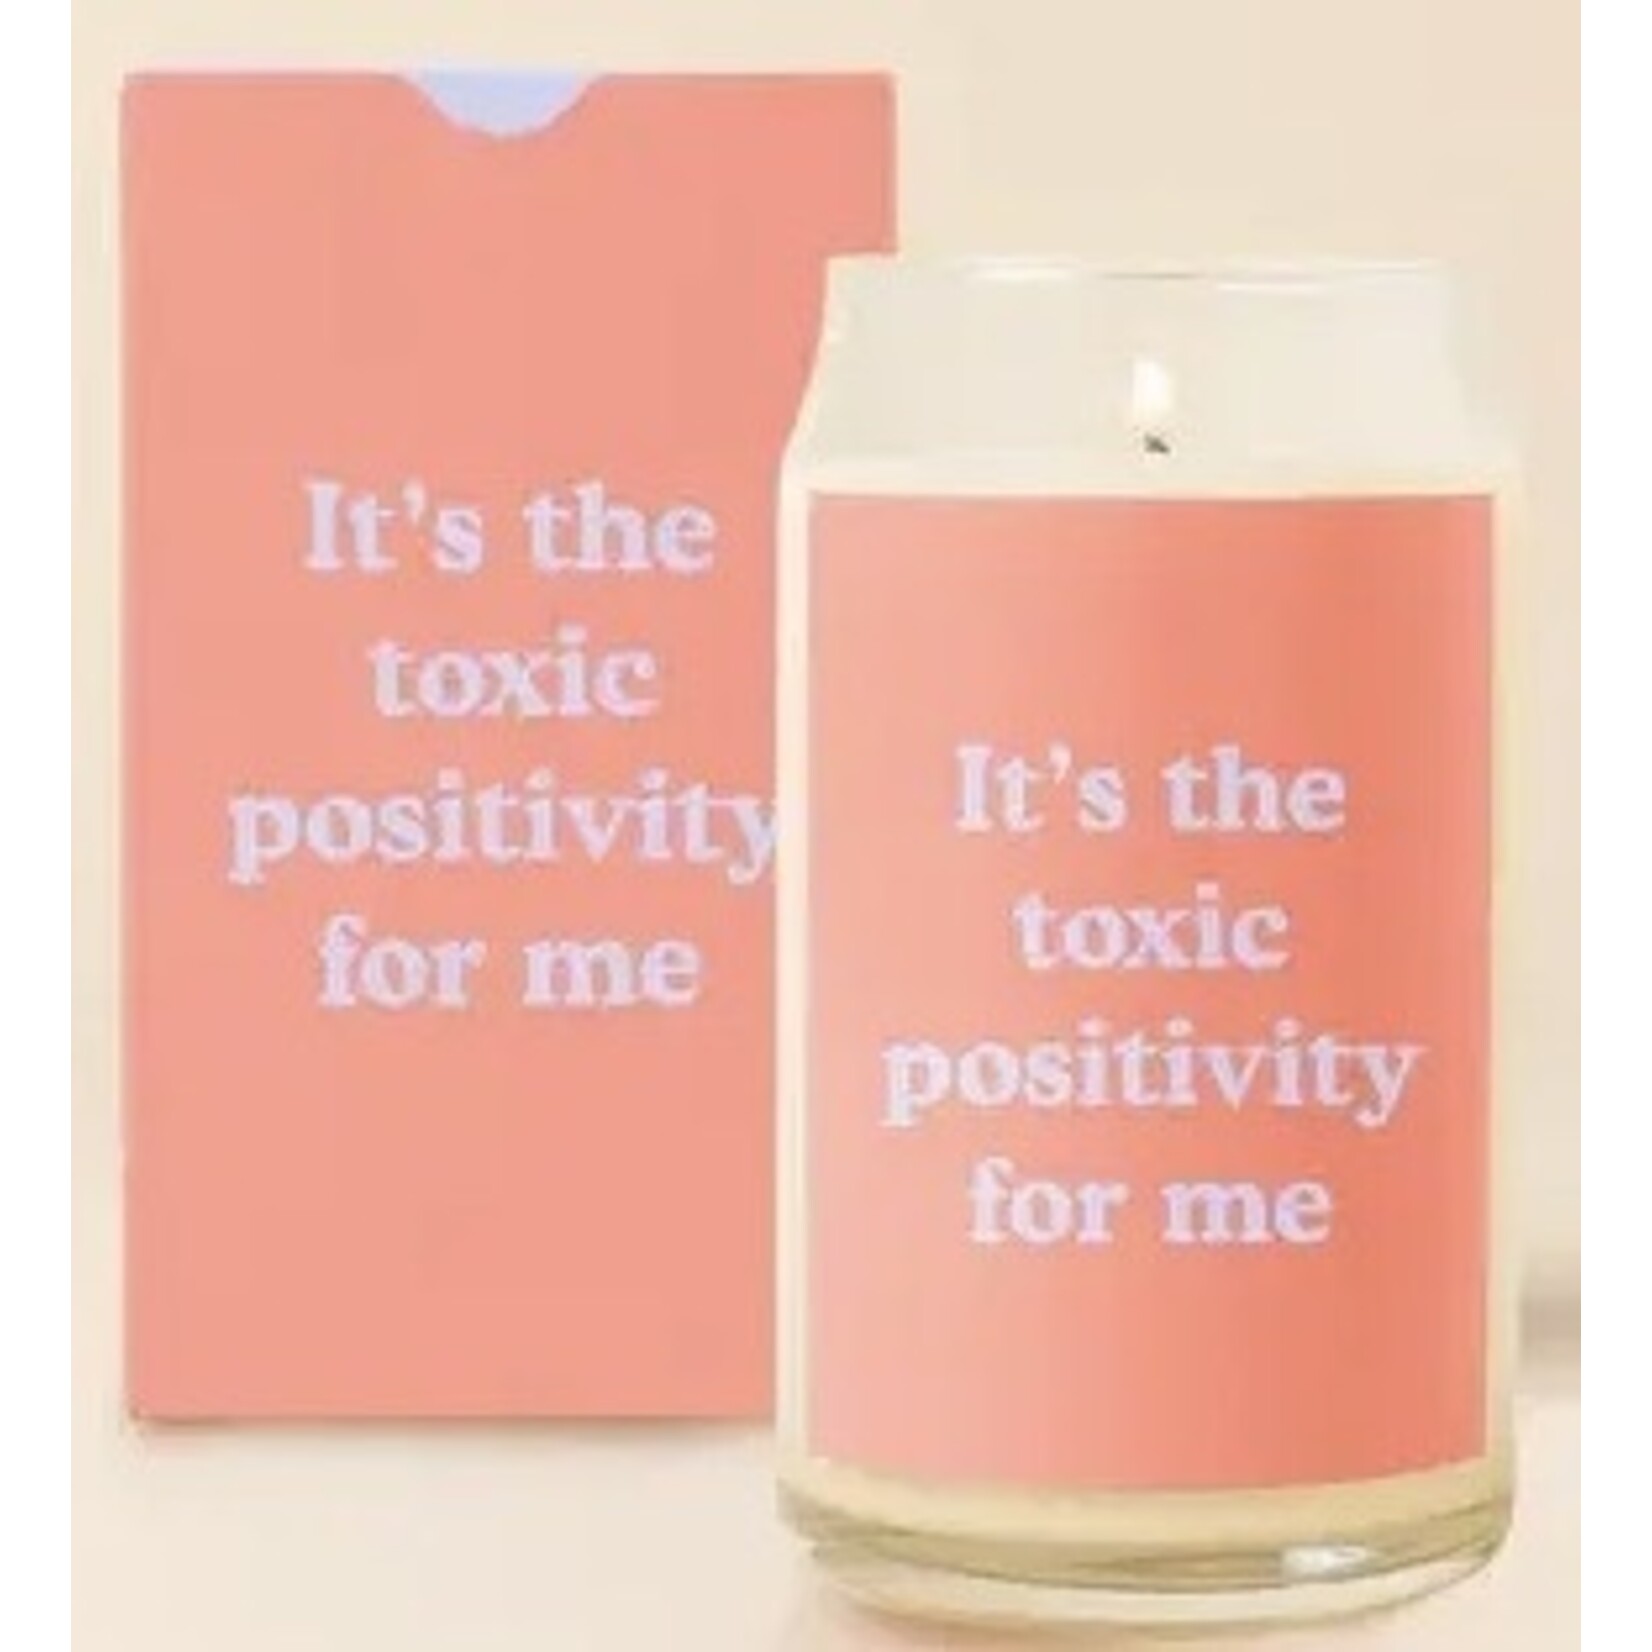 Talking Out of Turn Candle Can Glass - Yippie (It's the toxic positivity for me)